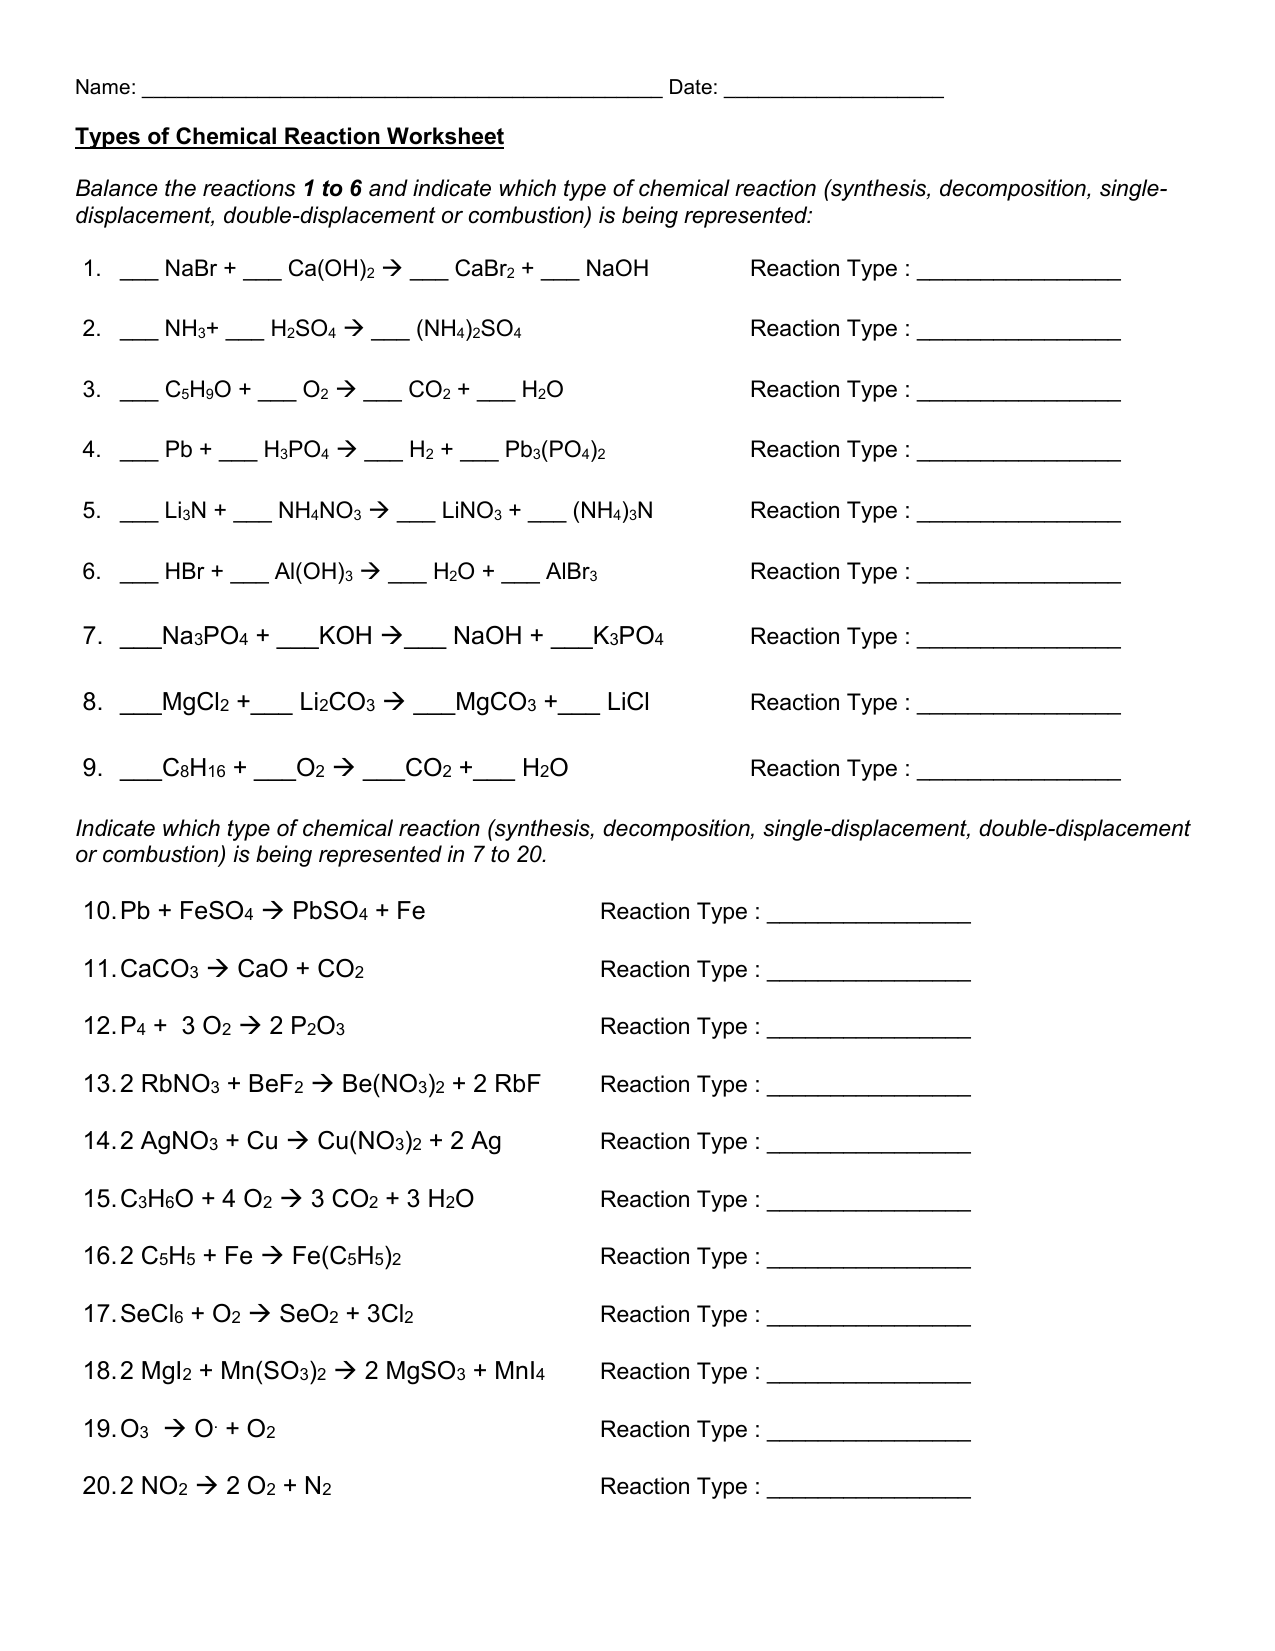 Types of Chemical Reaction Worksheet Throughout Chemical Reactions Worksheet Answers